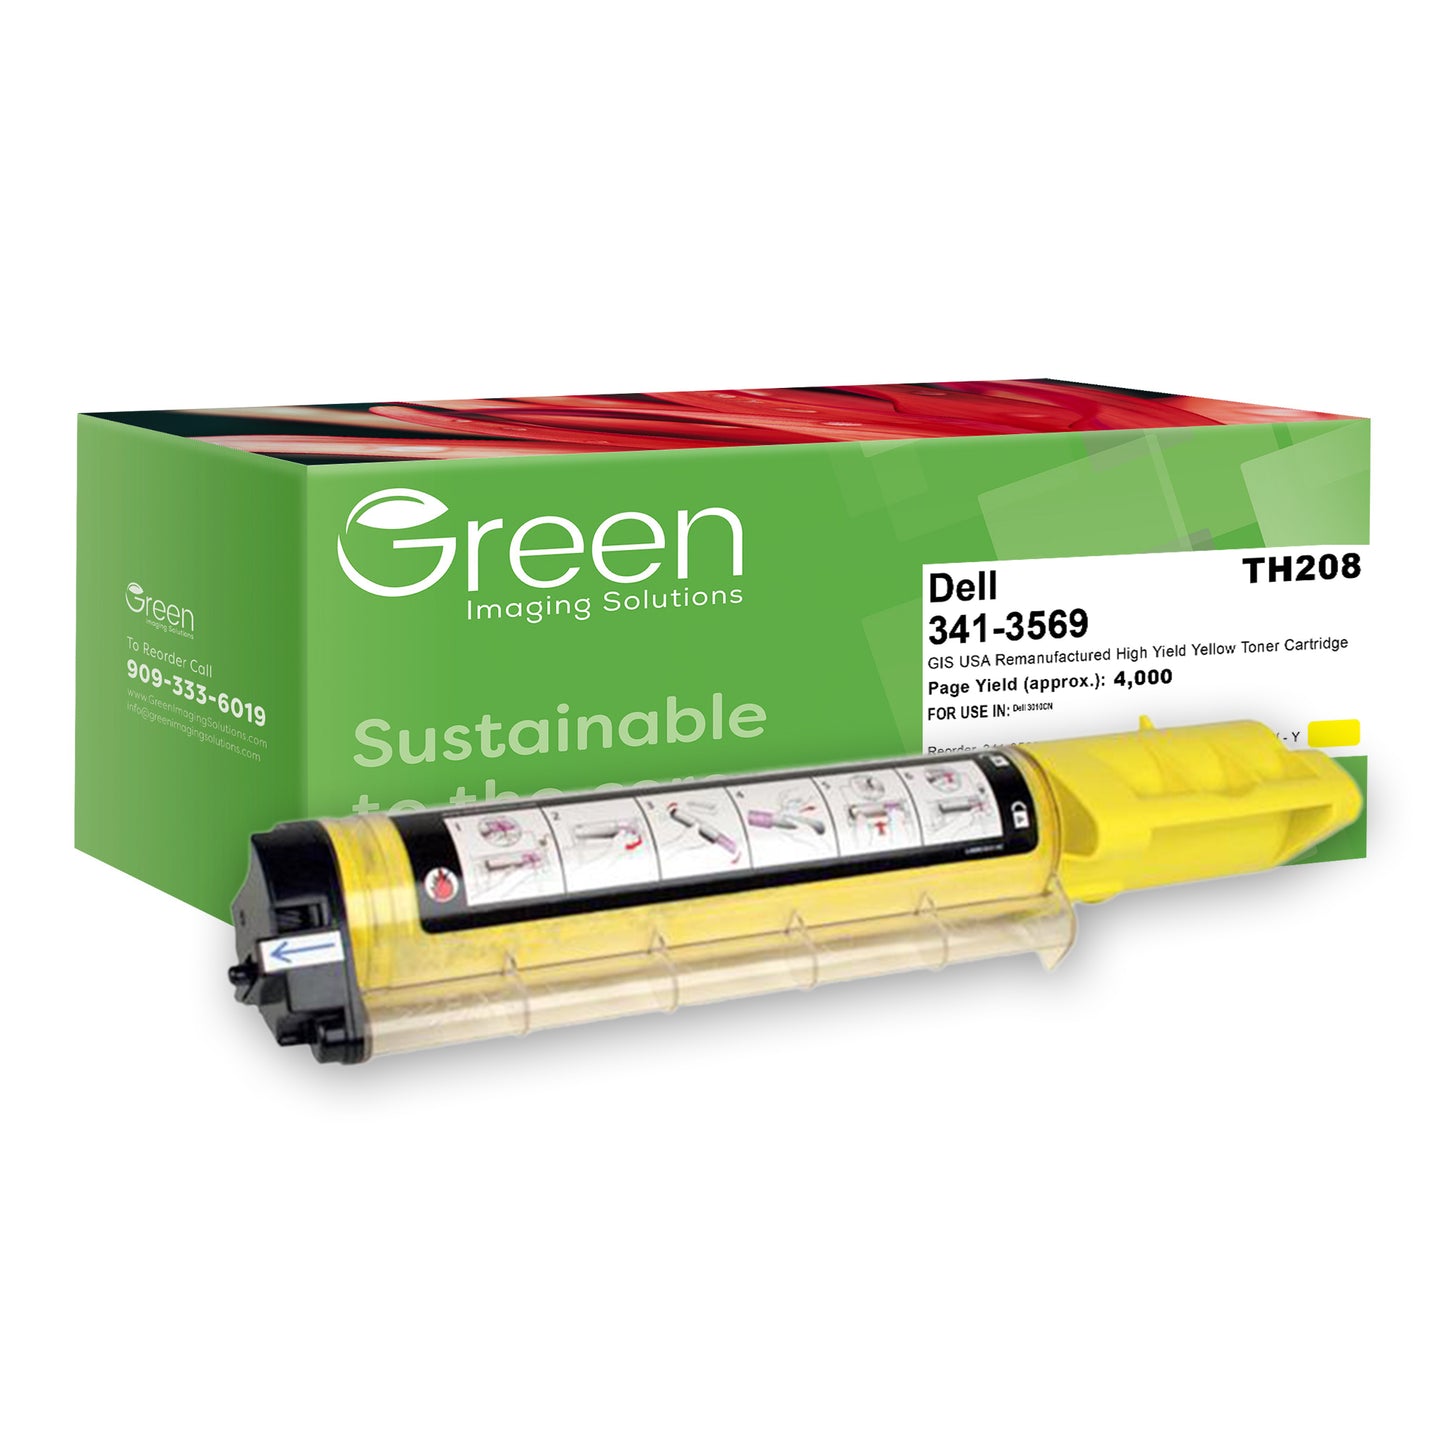 Green Imaging Solutions USA Remanufactured Non-OEM New High Yield Yellow Toner Cartridge for Dell 3010